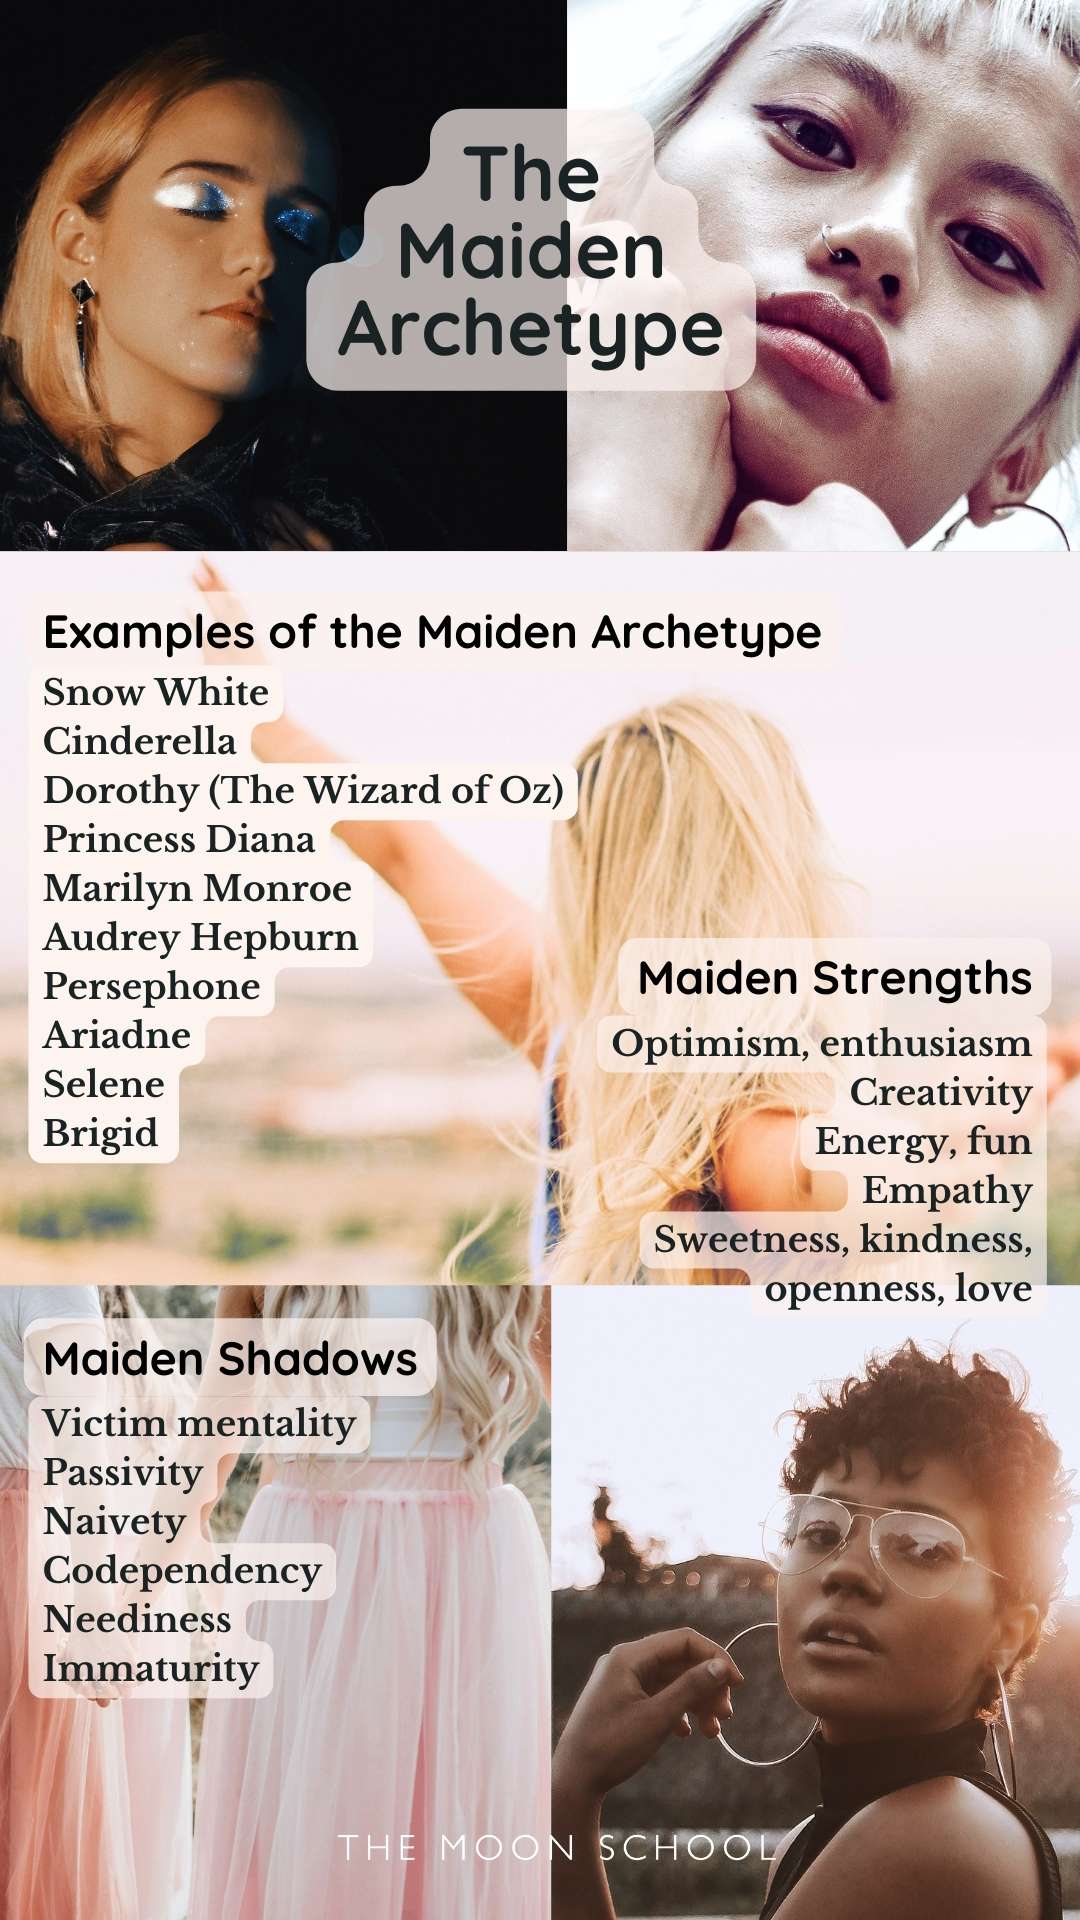 Guide to the Maiden Archetype with examples, strengths and shadow side